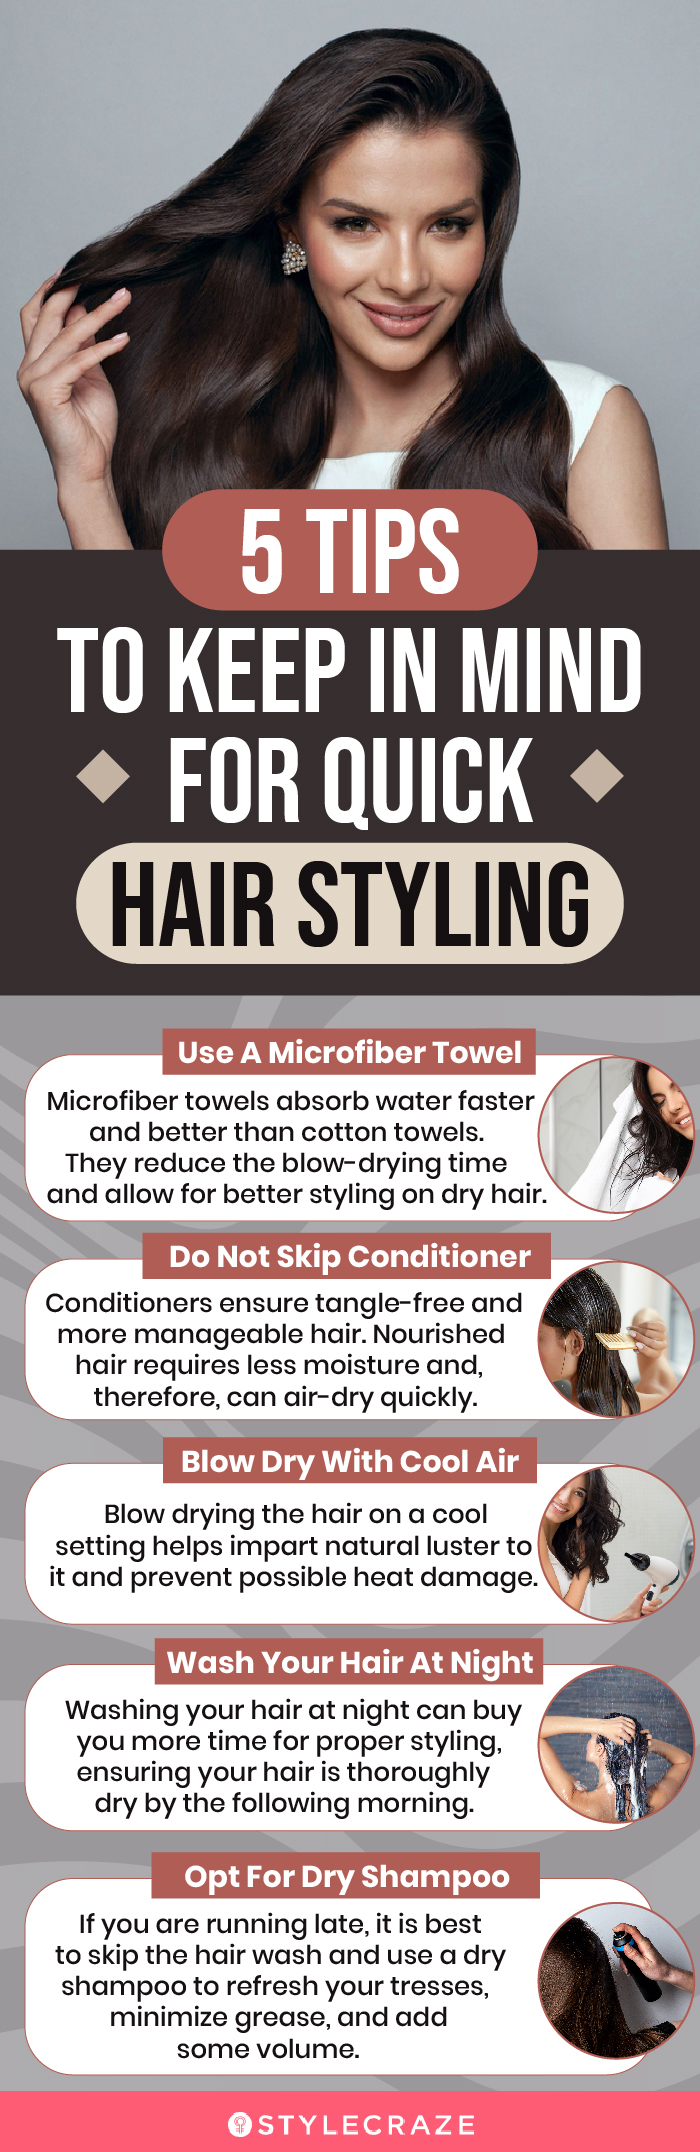 5 tips to keep in mind for quick hair styling (infographic)